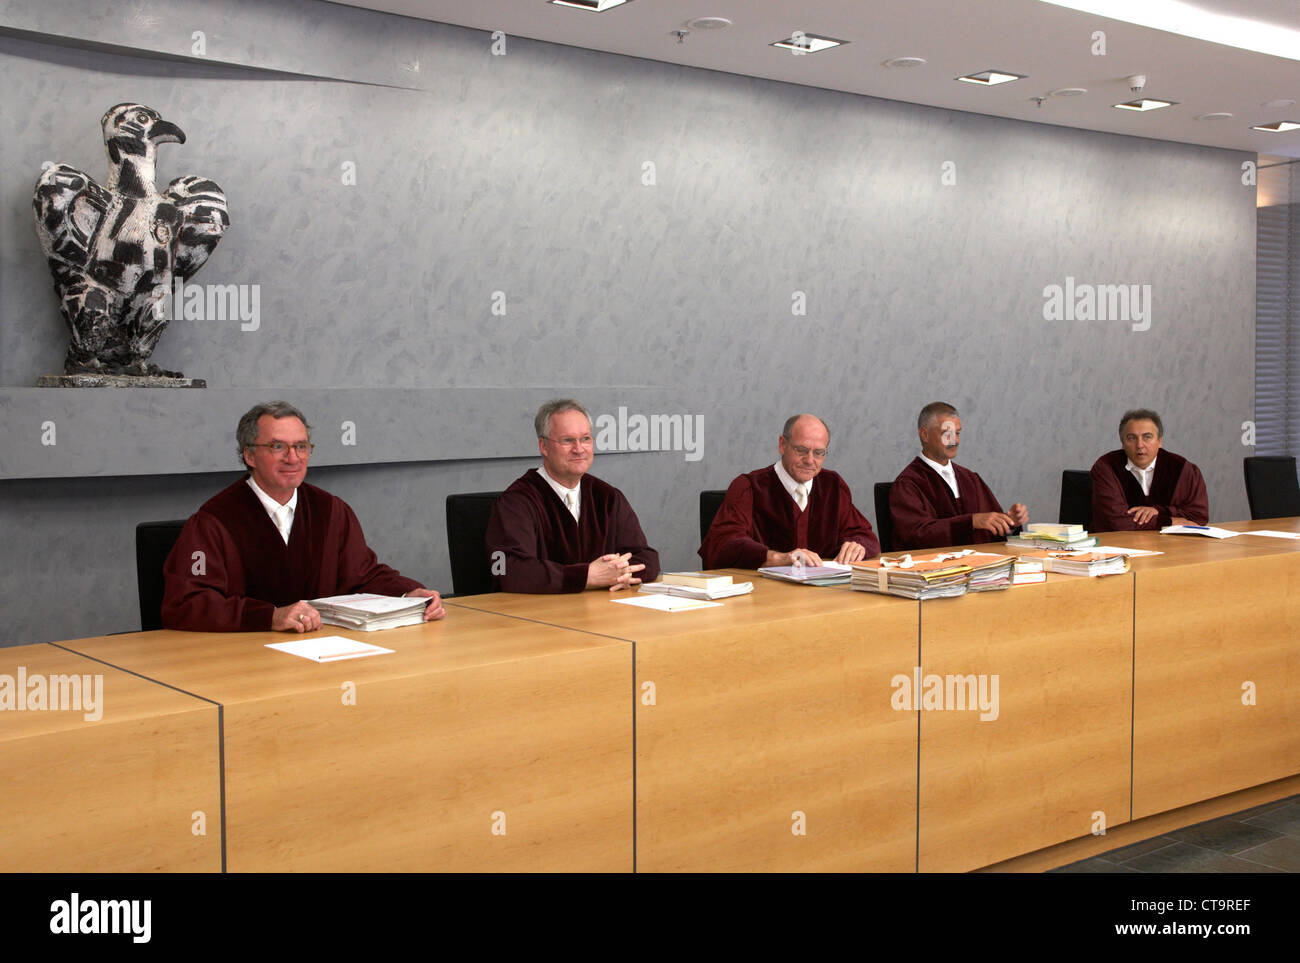 Karlsruhe - Judges of the cartel at the Federal Senate Stock Photo